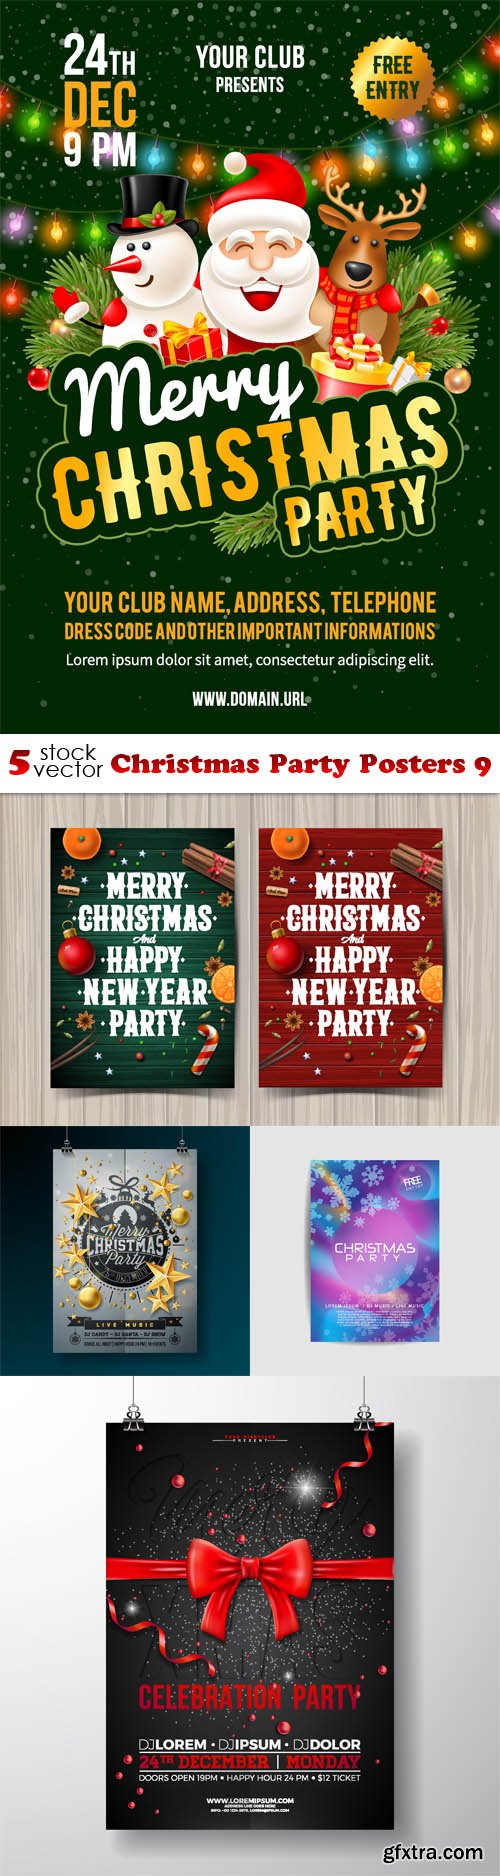 Vectors - Christmas Party Posters 9